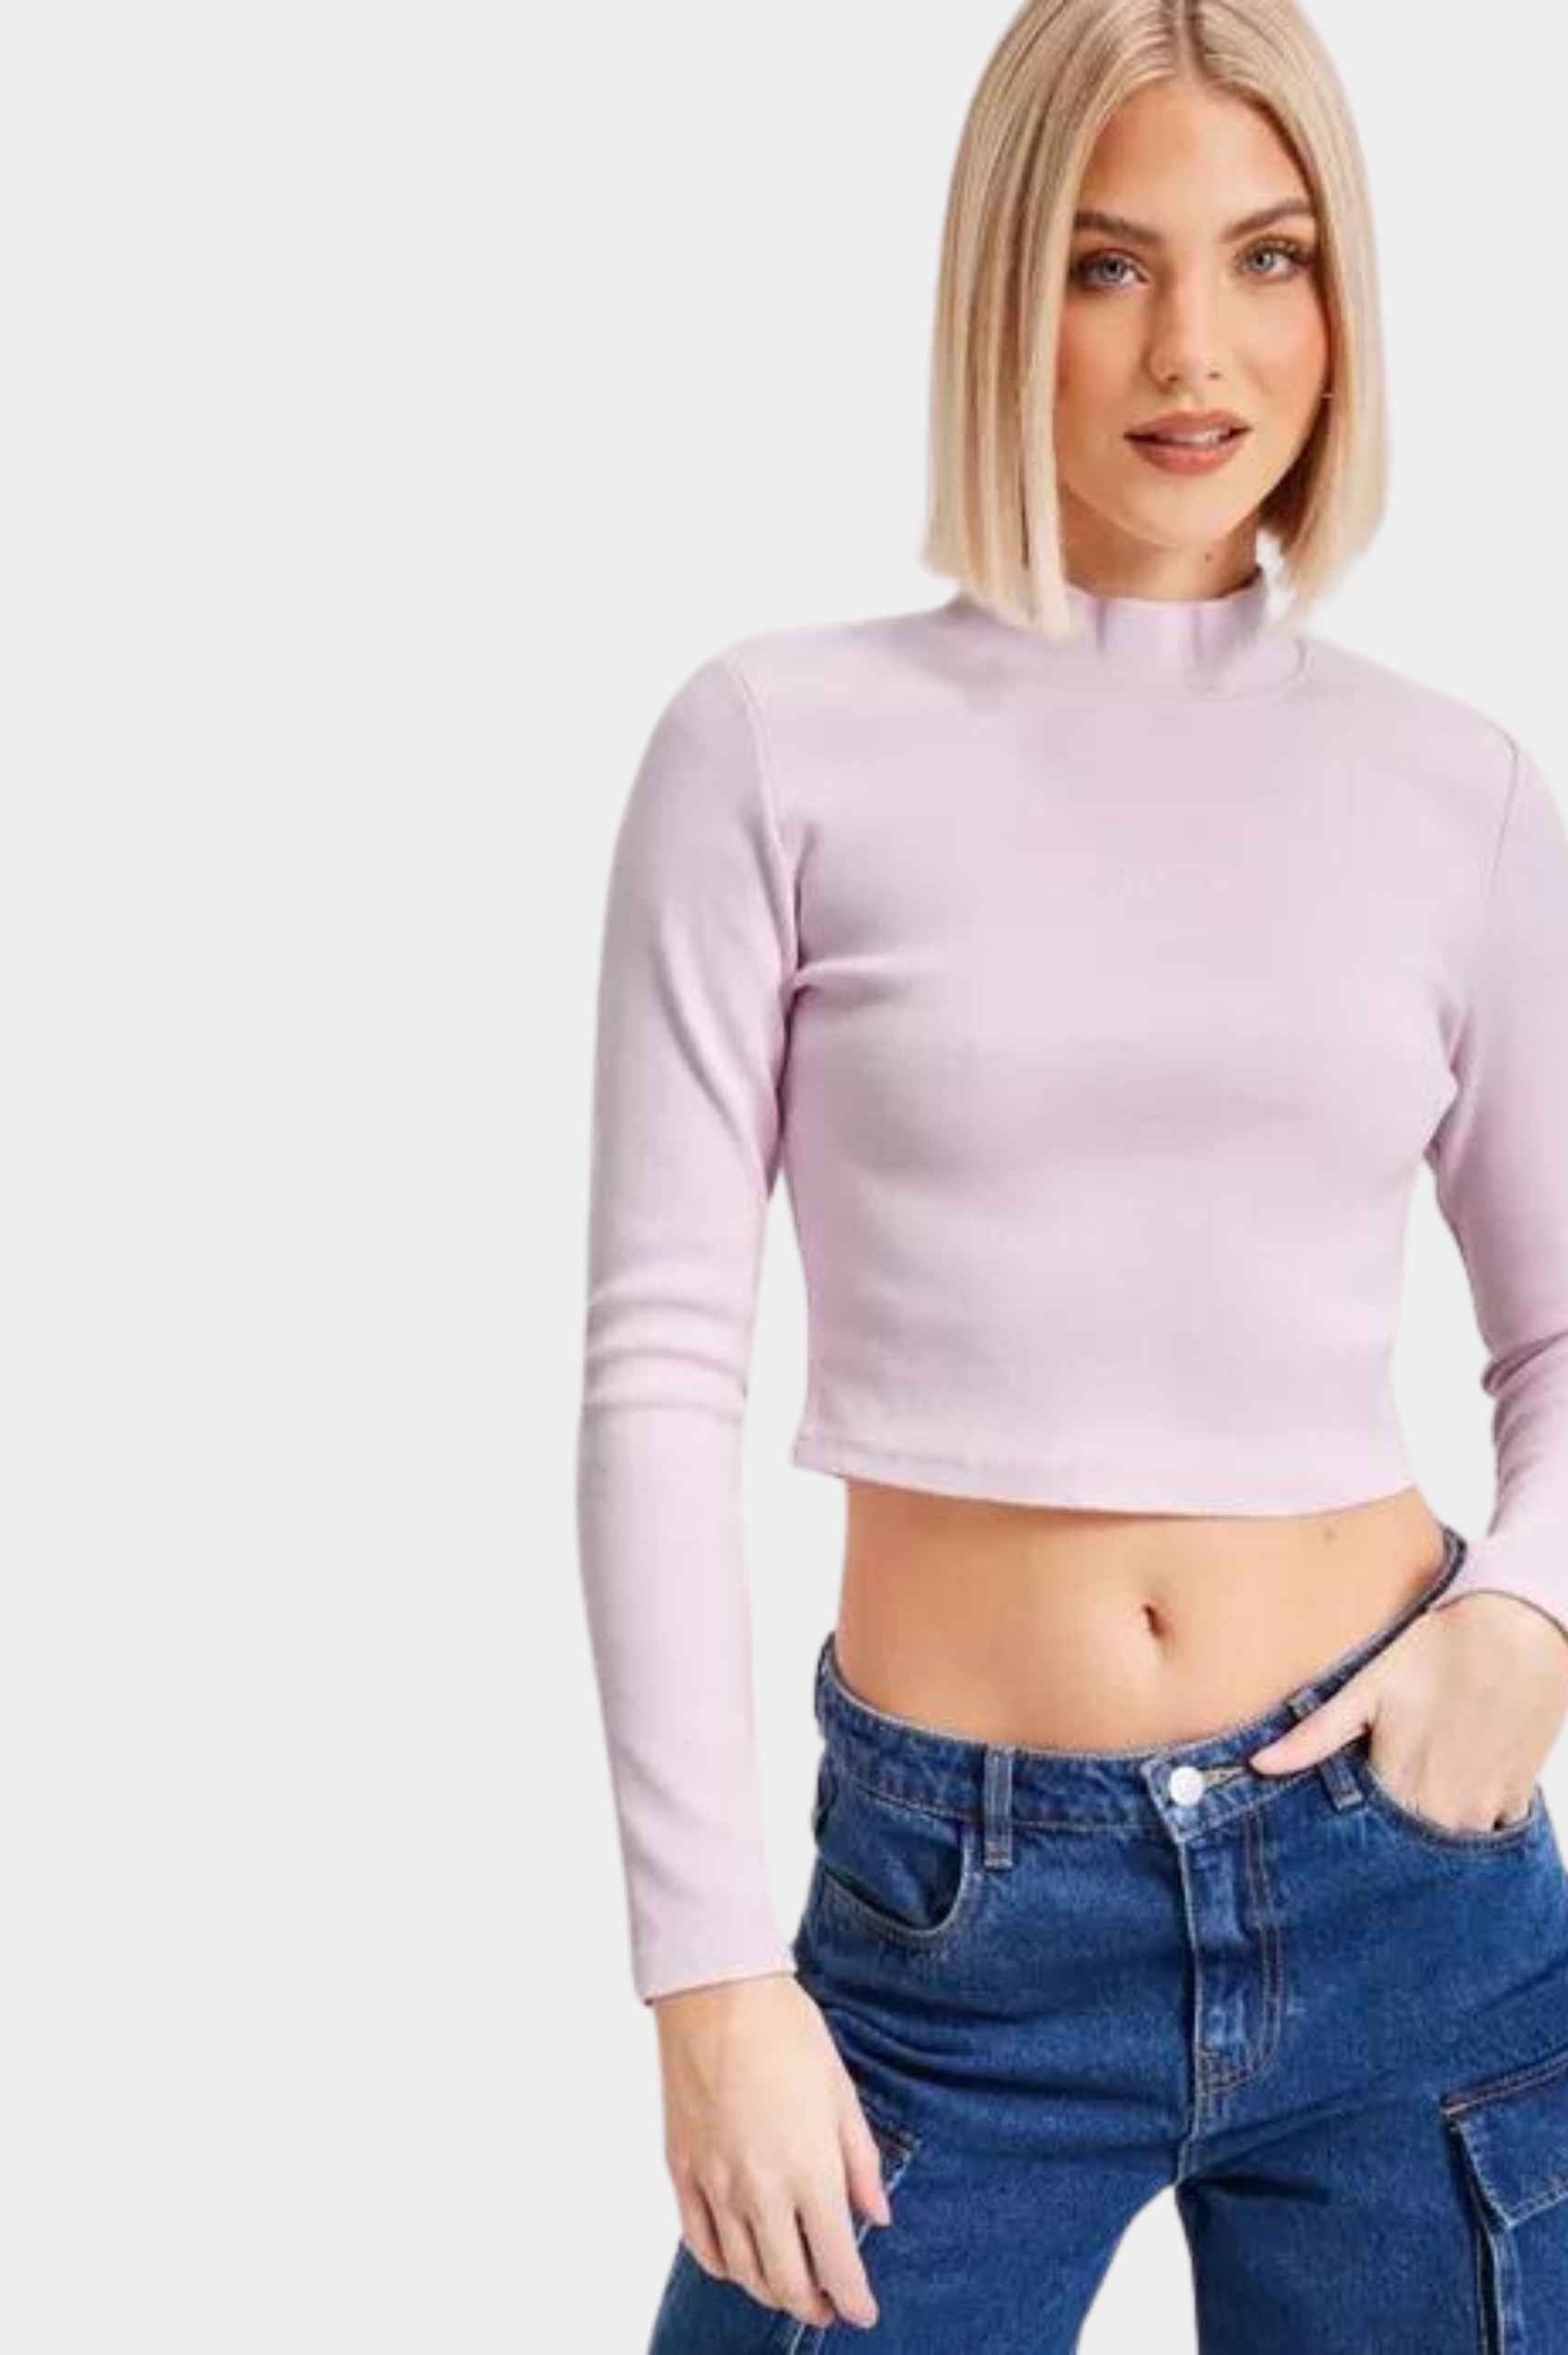 Abrand A Heather LS Mock Neck Top